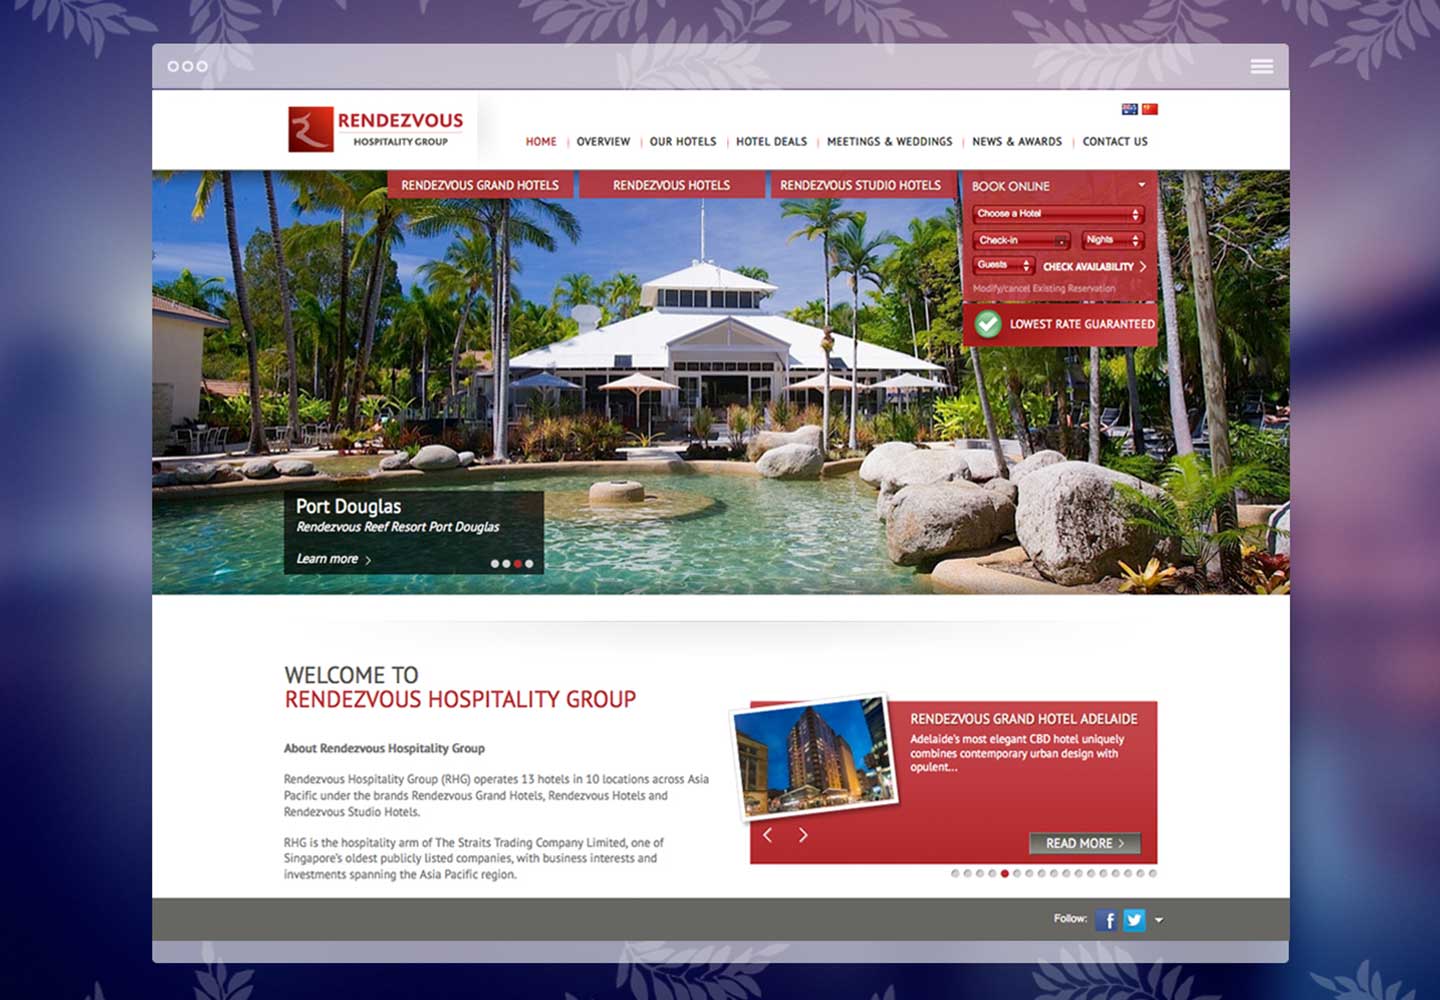 Brand Consultancy in Hospitality Industry. Website design for Rendezvous Hotel.